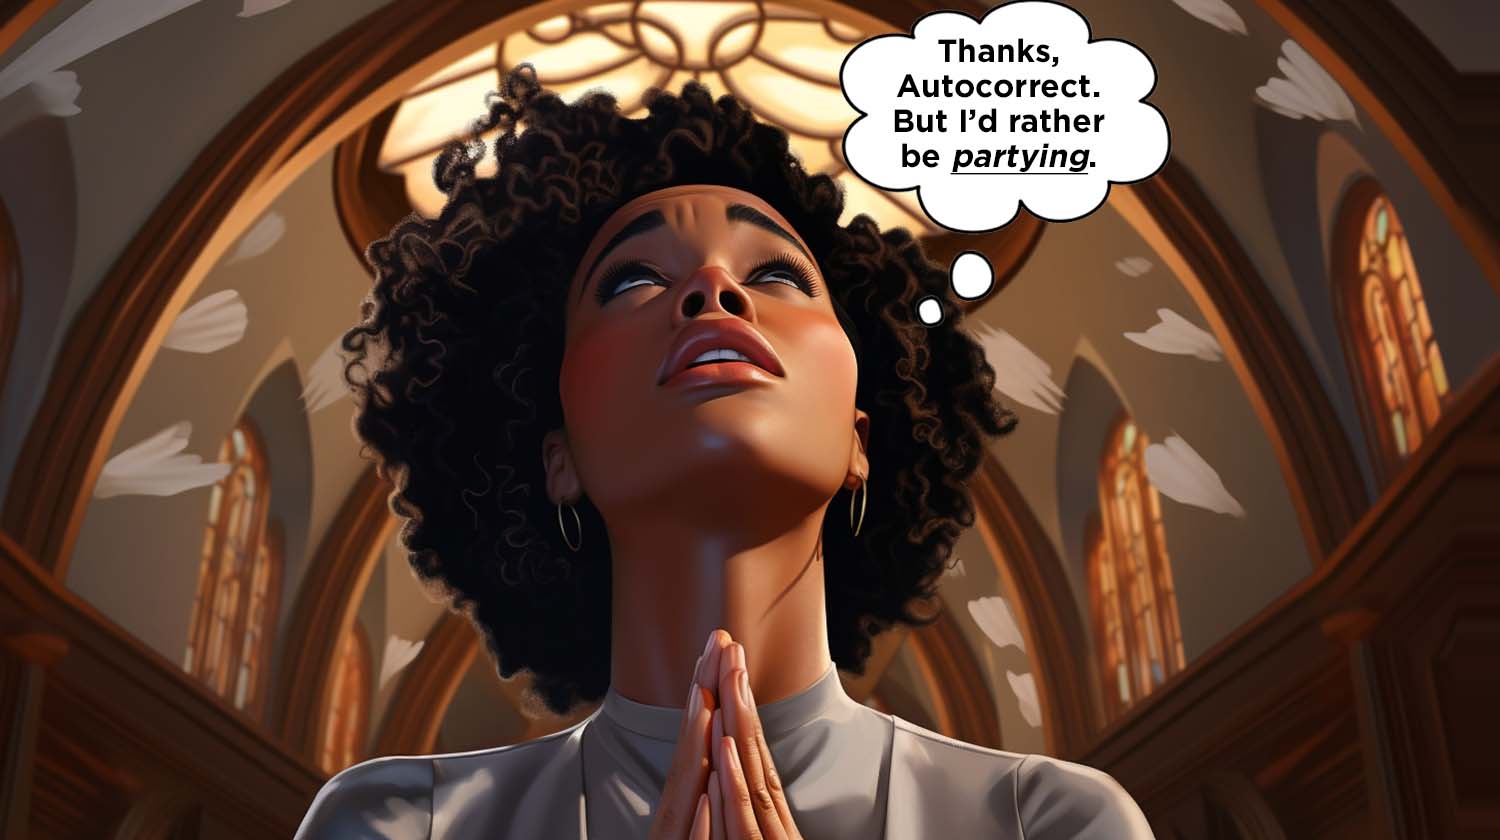 A Cartoon Image Of A Woman Praying In A Church Because Of A Funny Autocorrect Fail.